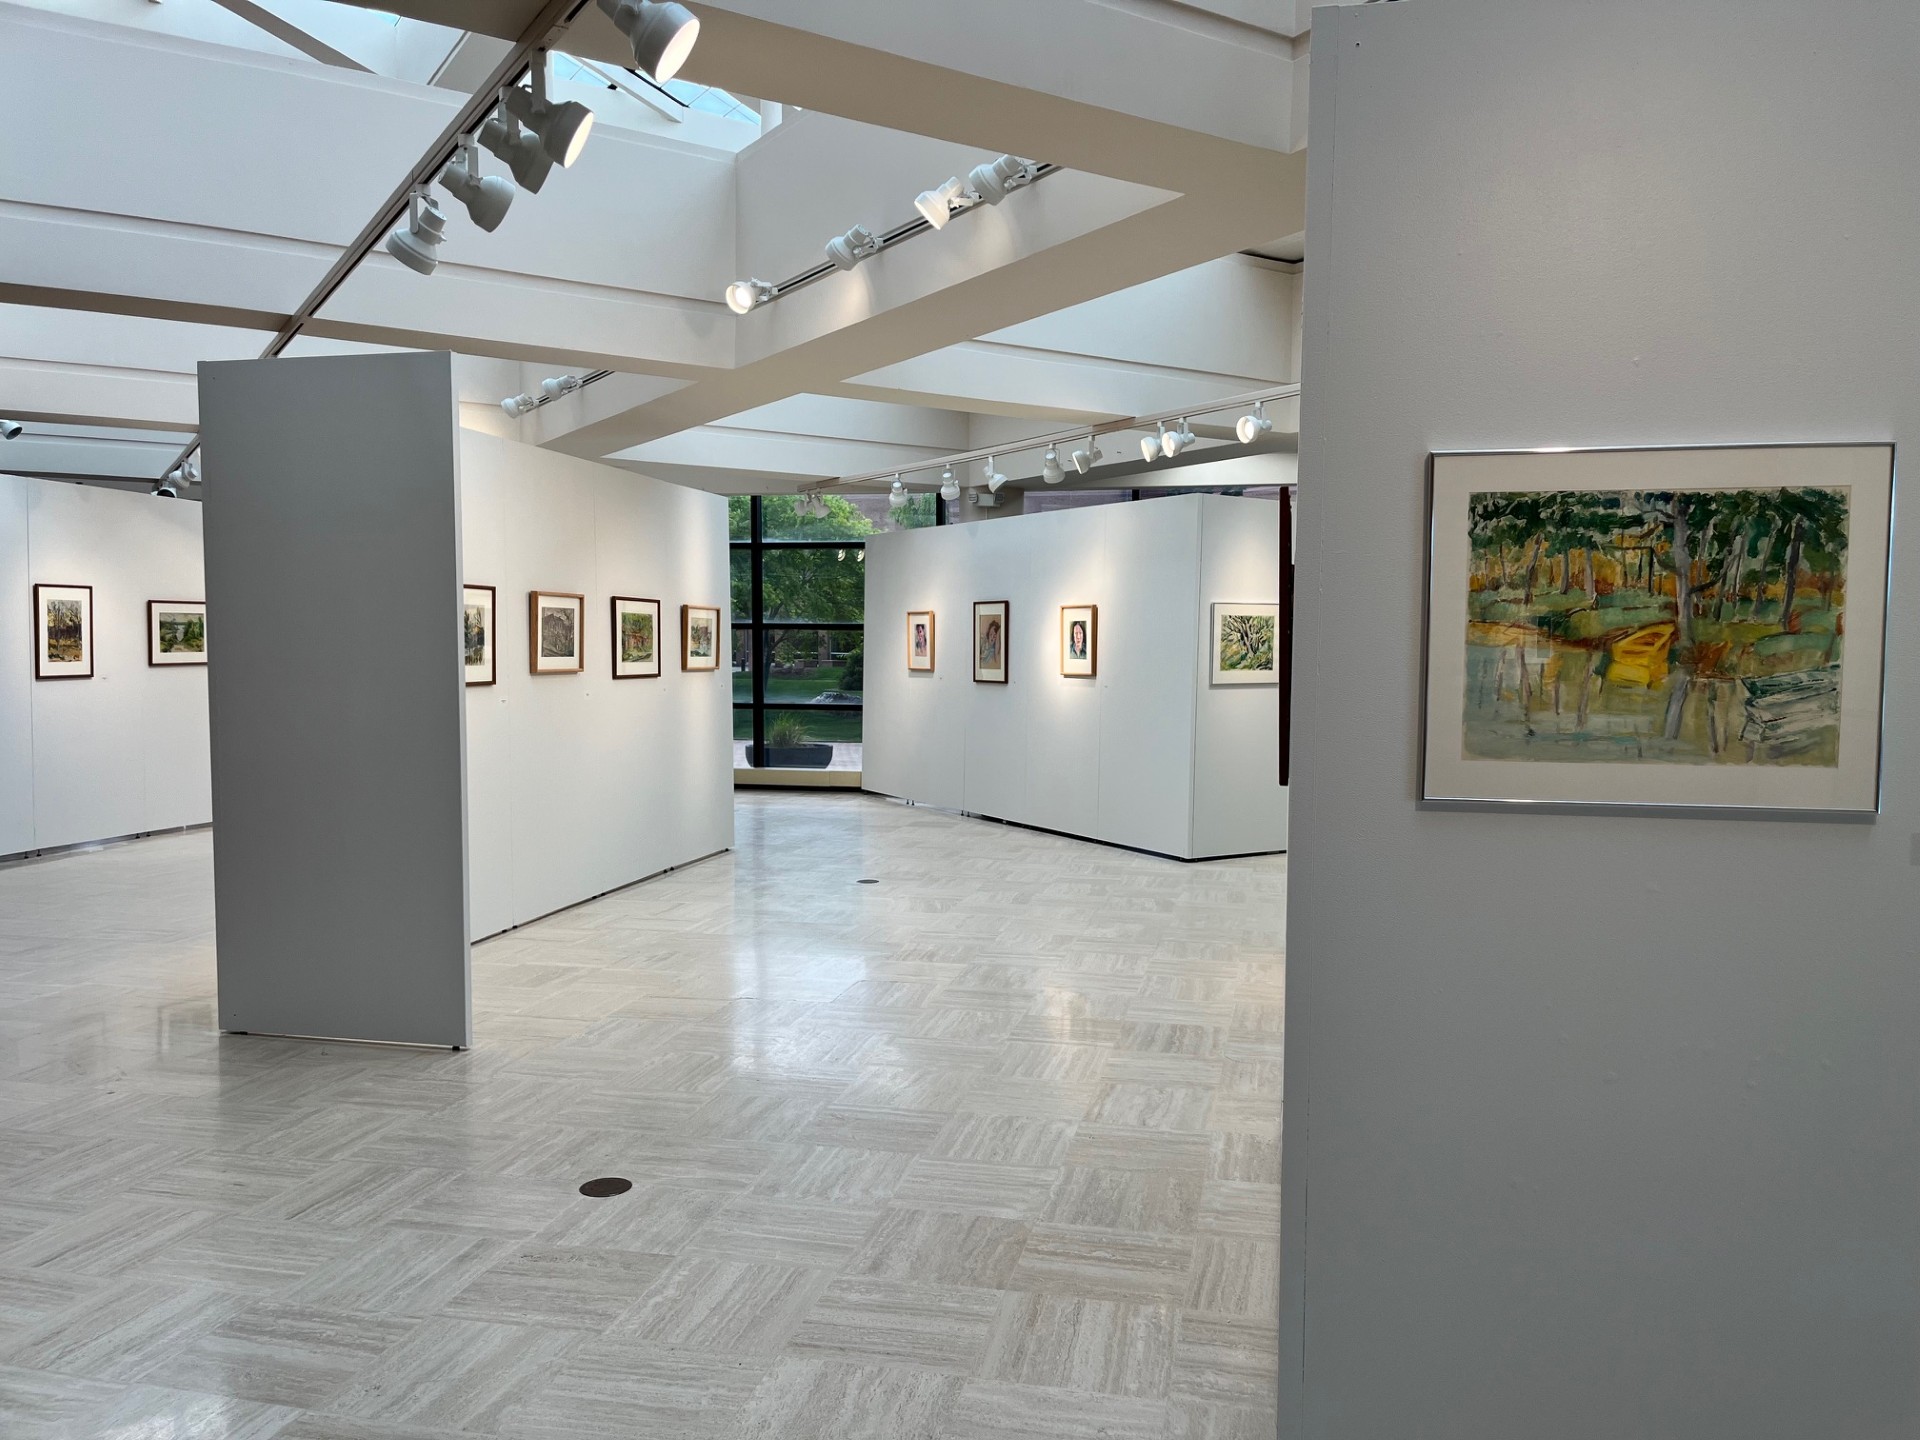 Exhibition viewed from the north end of the gallery looking south monoprint 